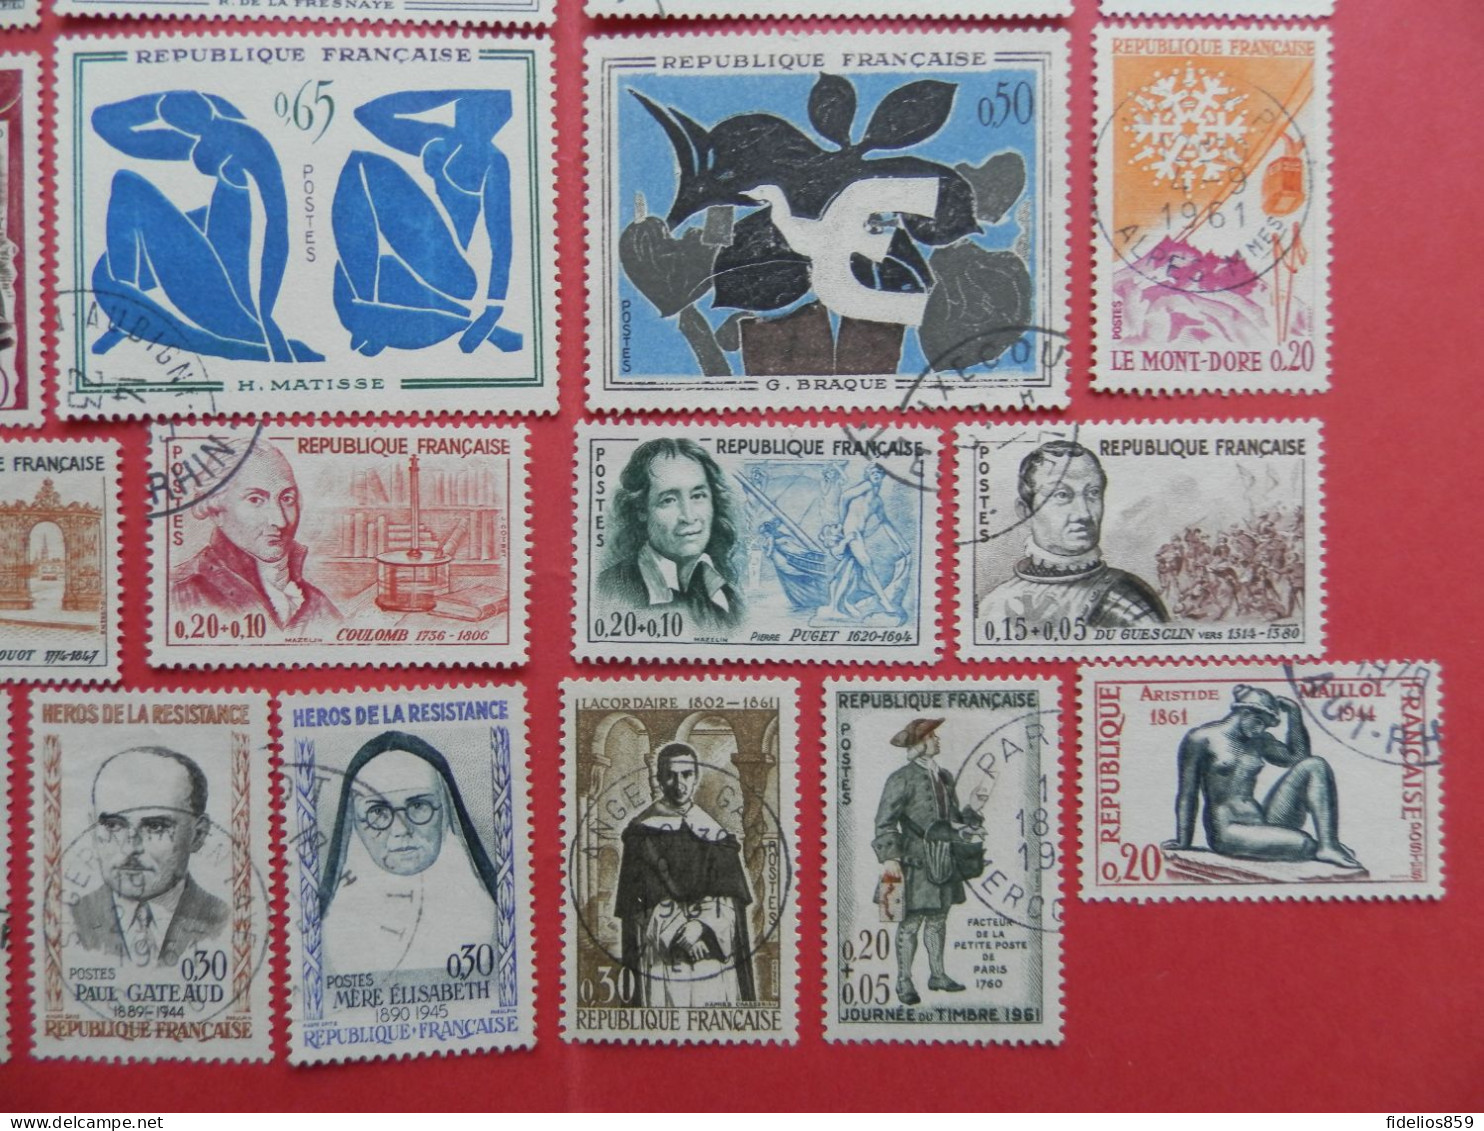 FRANCE : ANNEE COMPLETE 1961 SOIT 44TIMBRES OBLITERES QUALITE LUXE (VOIR PHOTOS) - 1960-1969